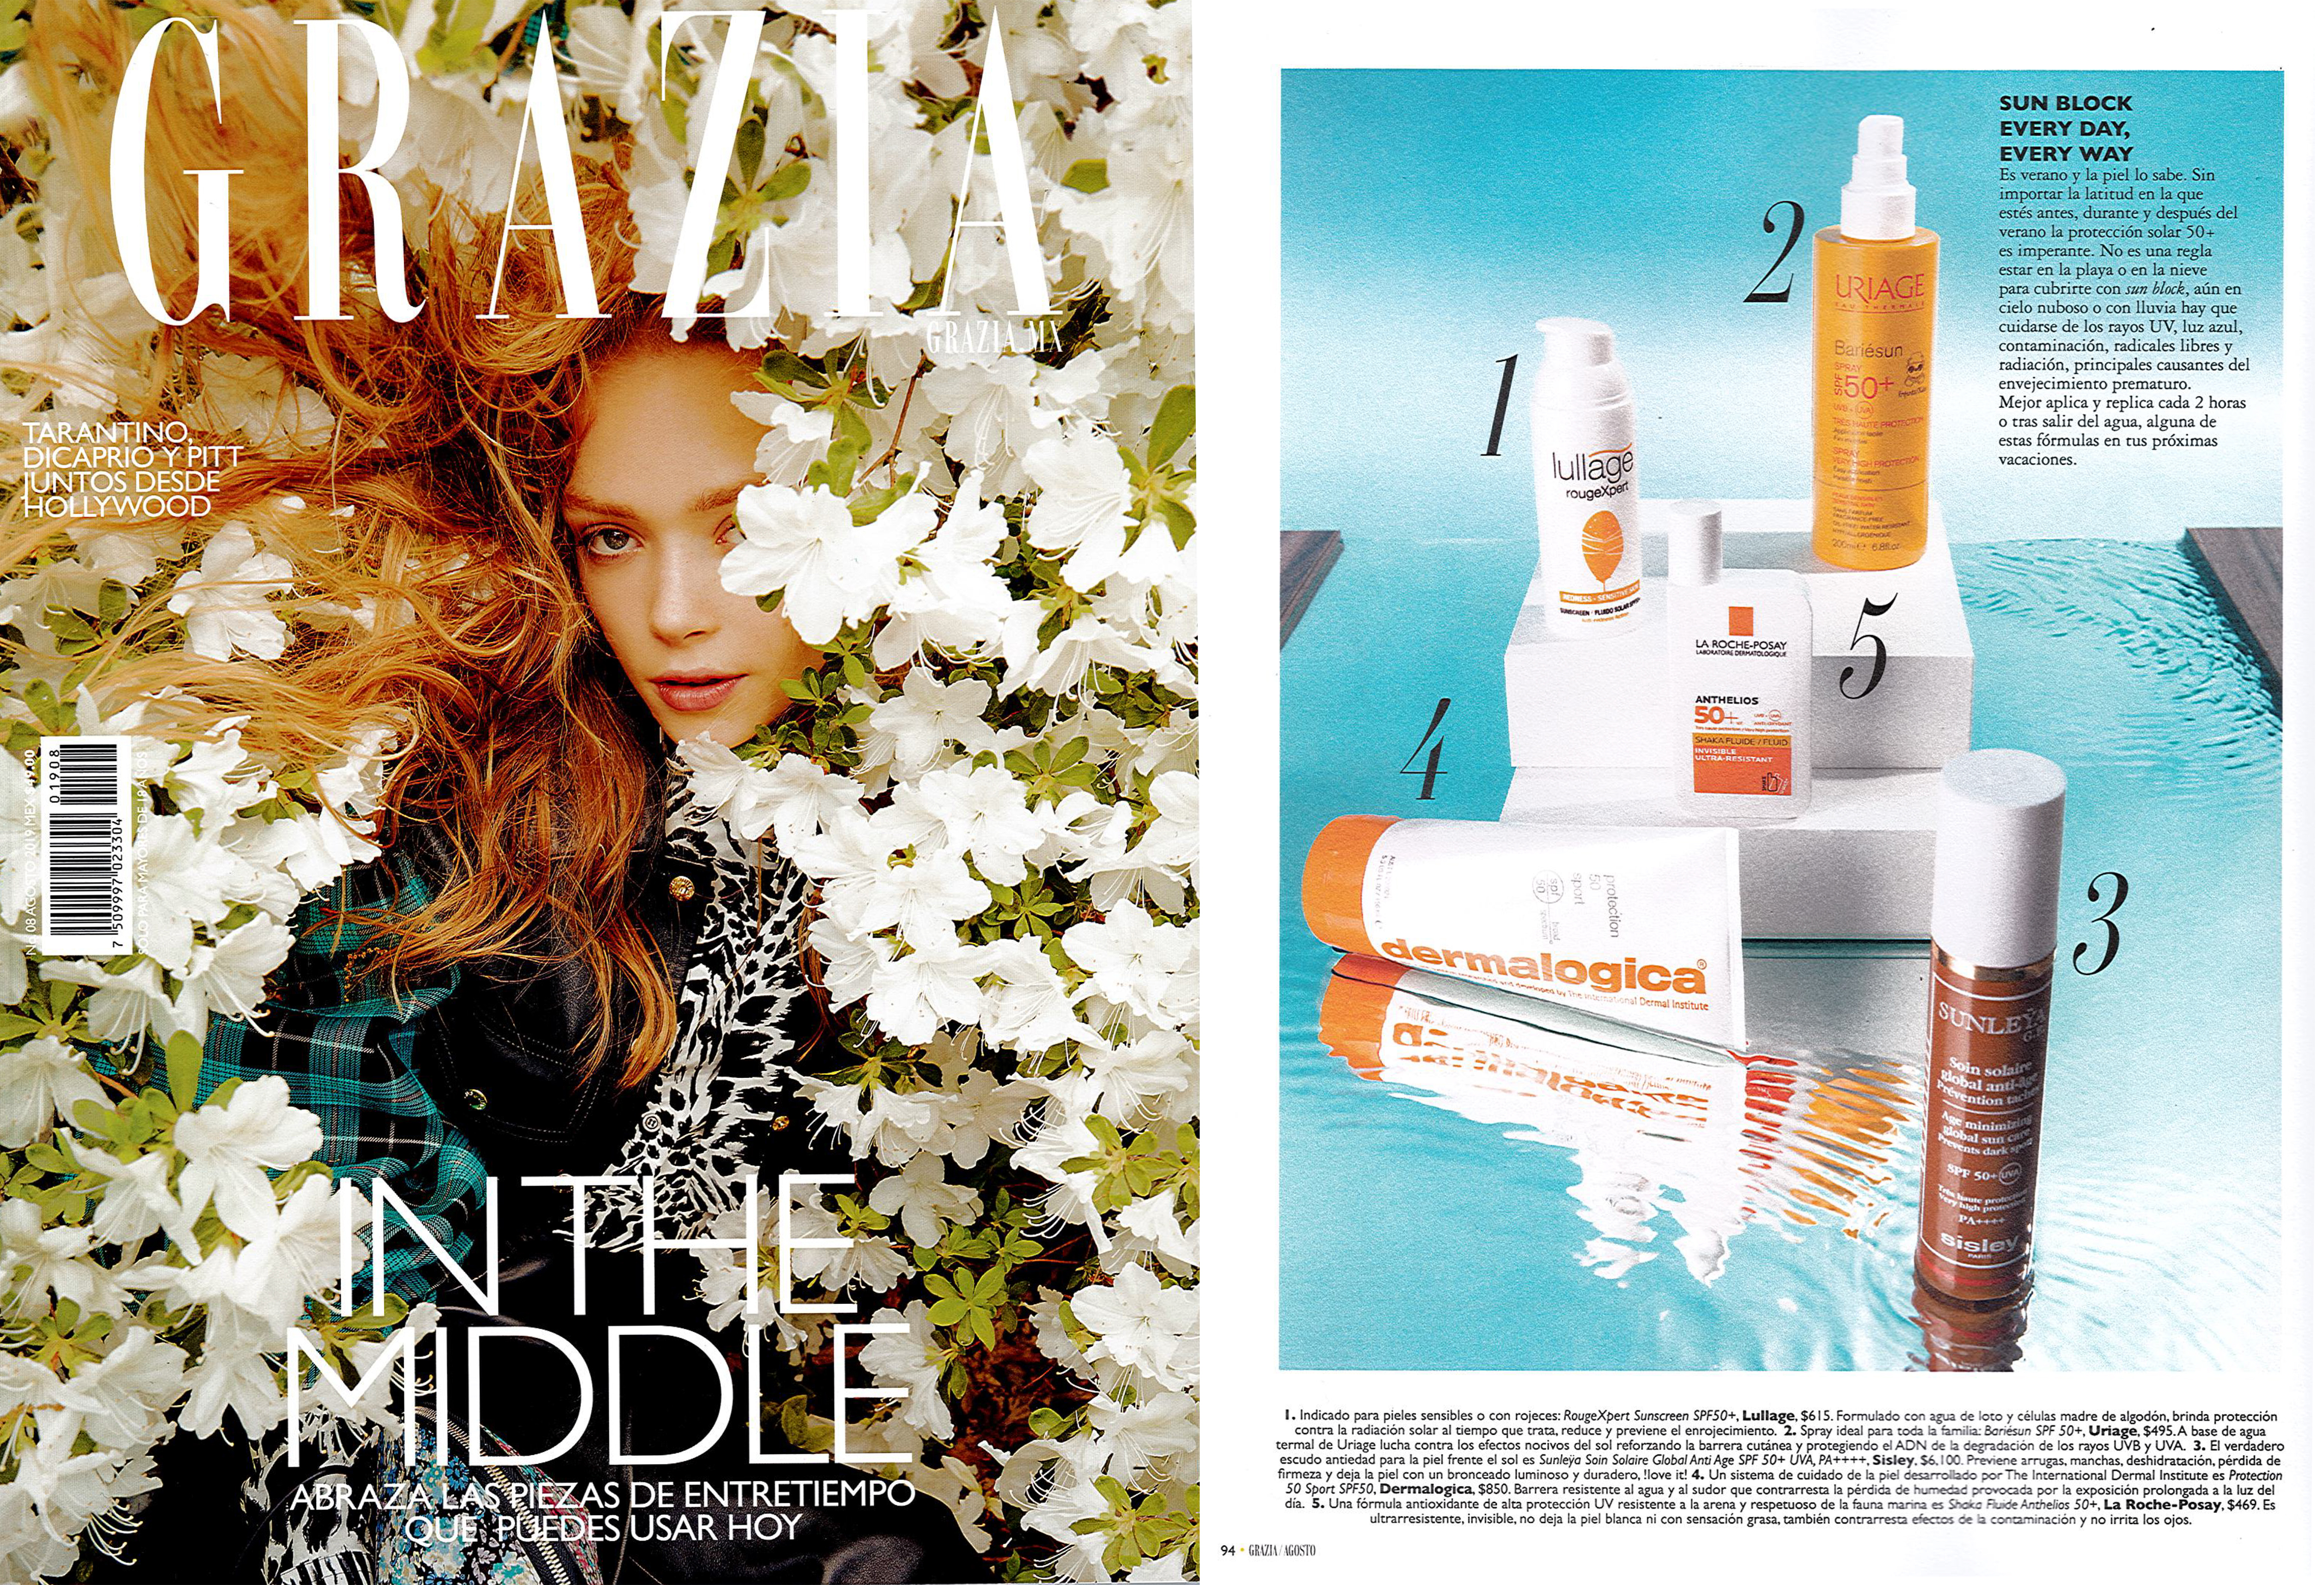 Grazia Mexico recommends Lullage rougeXpert to protect your sensitive skin this summer